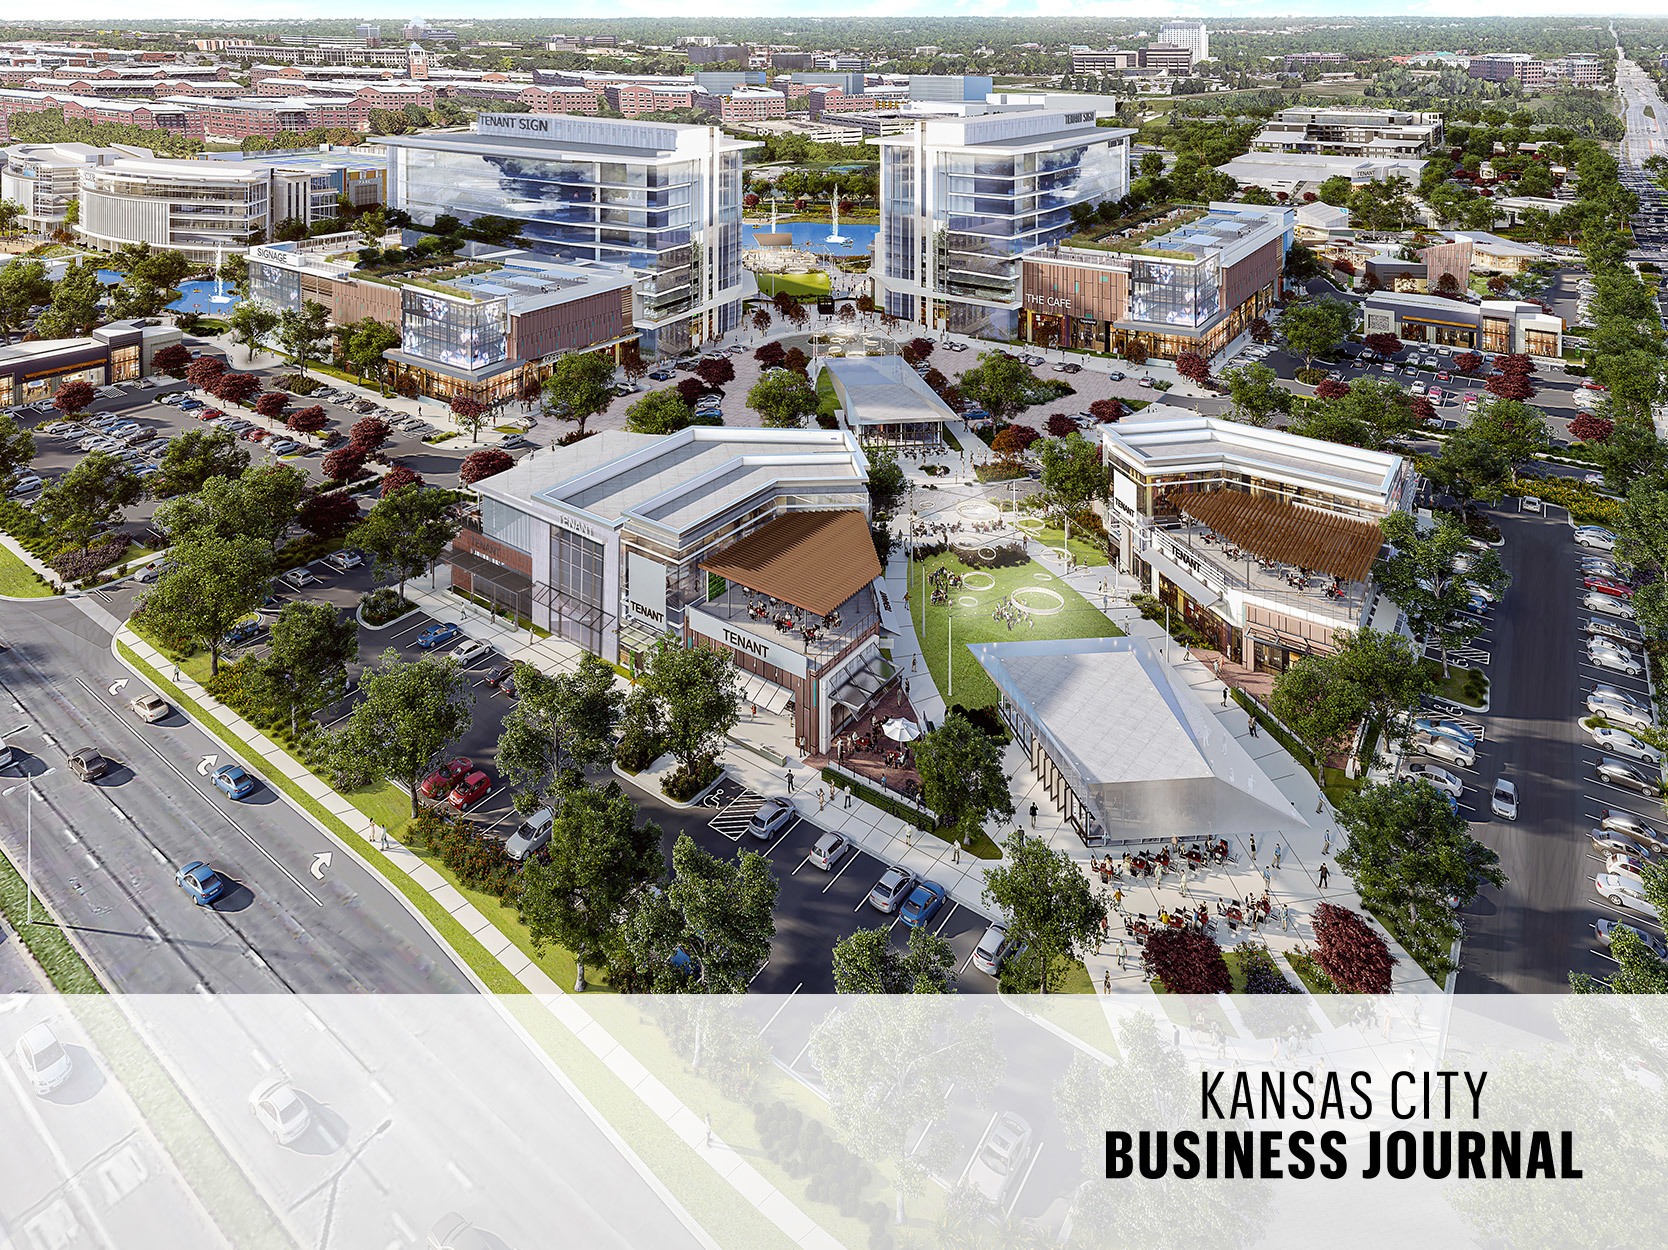 Editor’s Briefing: Firm’s designs on growth reshape its operations and the KC landscape